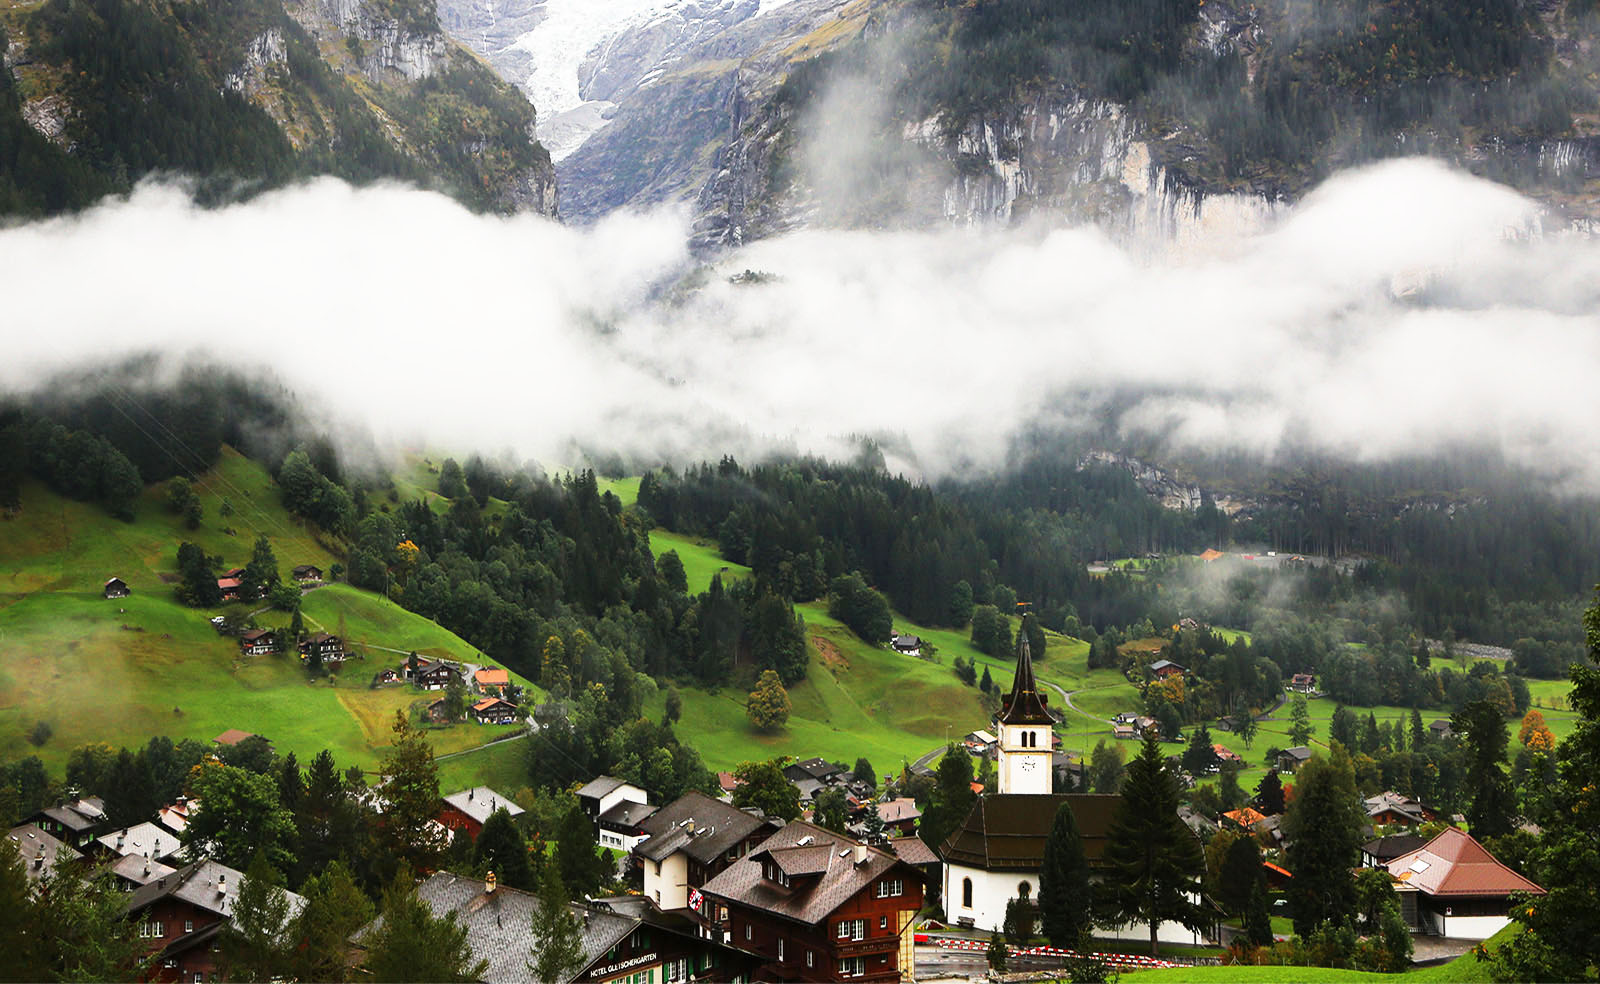 A Switzerland village in a foggy morning